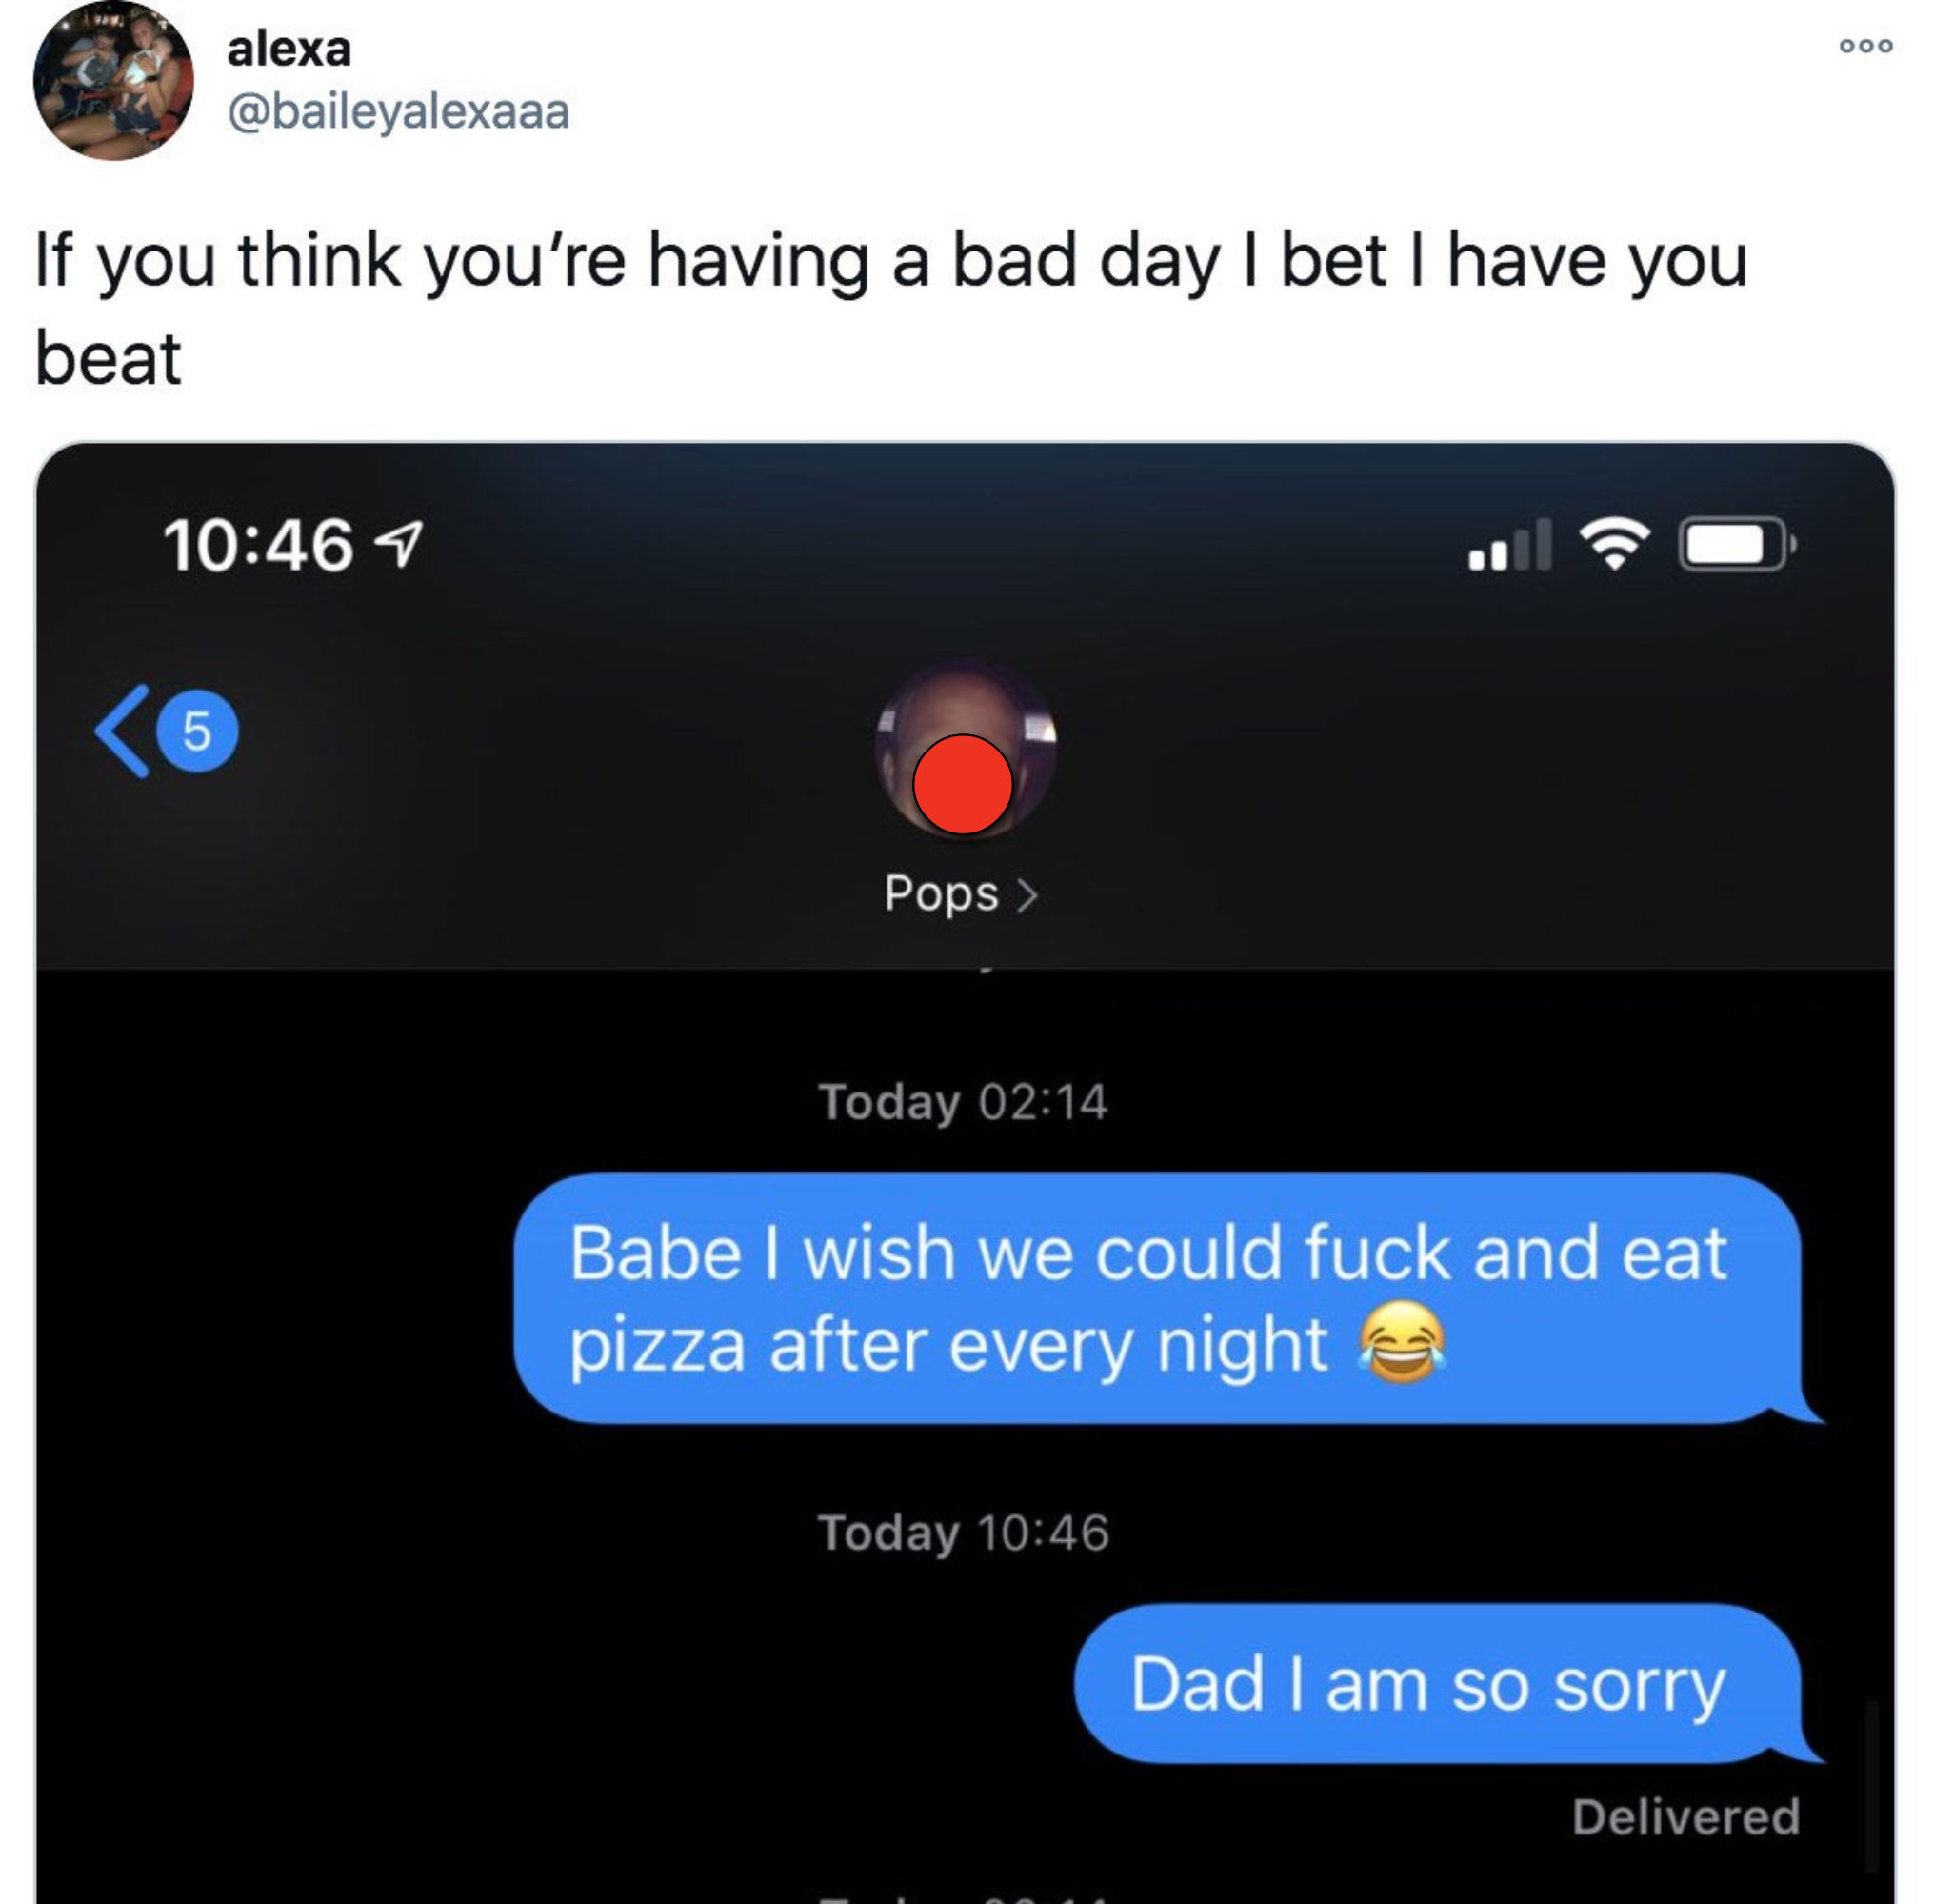 person who accidentally sexted their dad thinking it was their partner